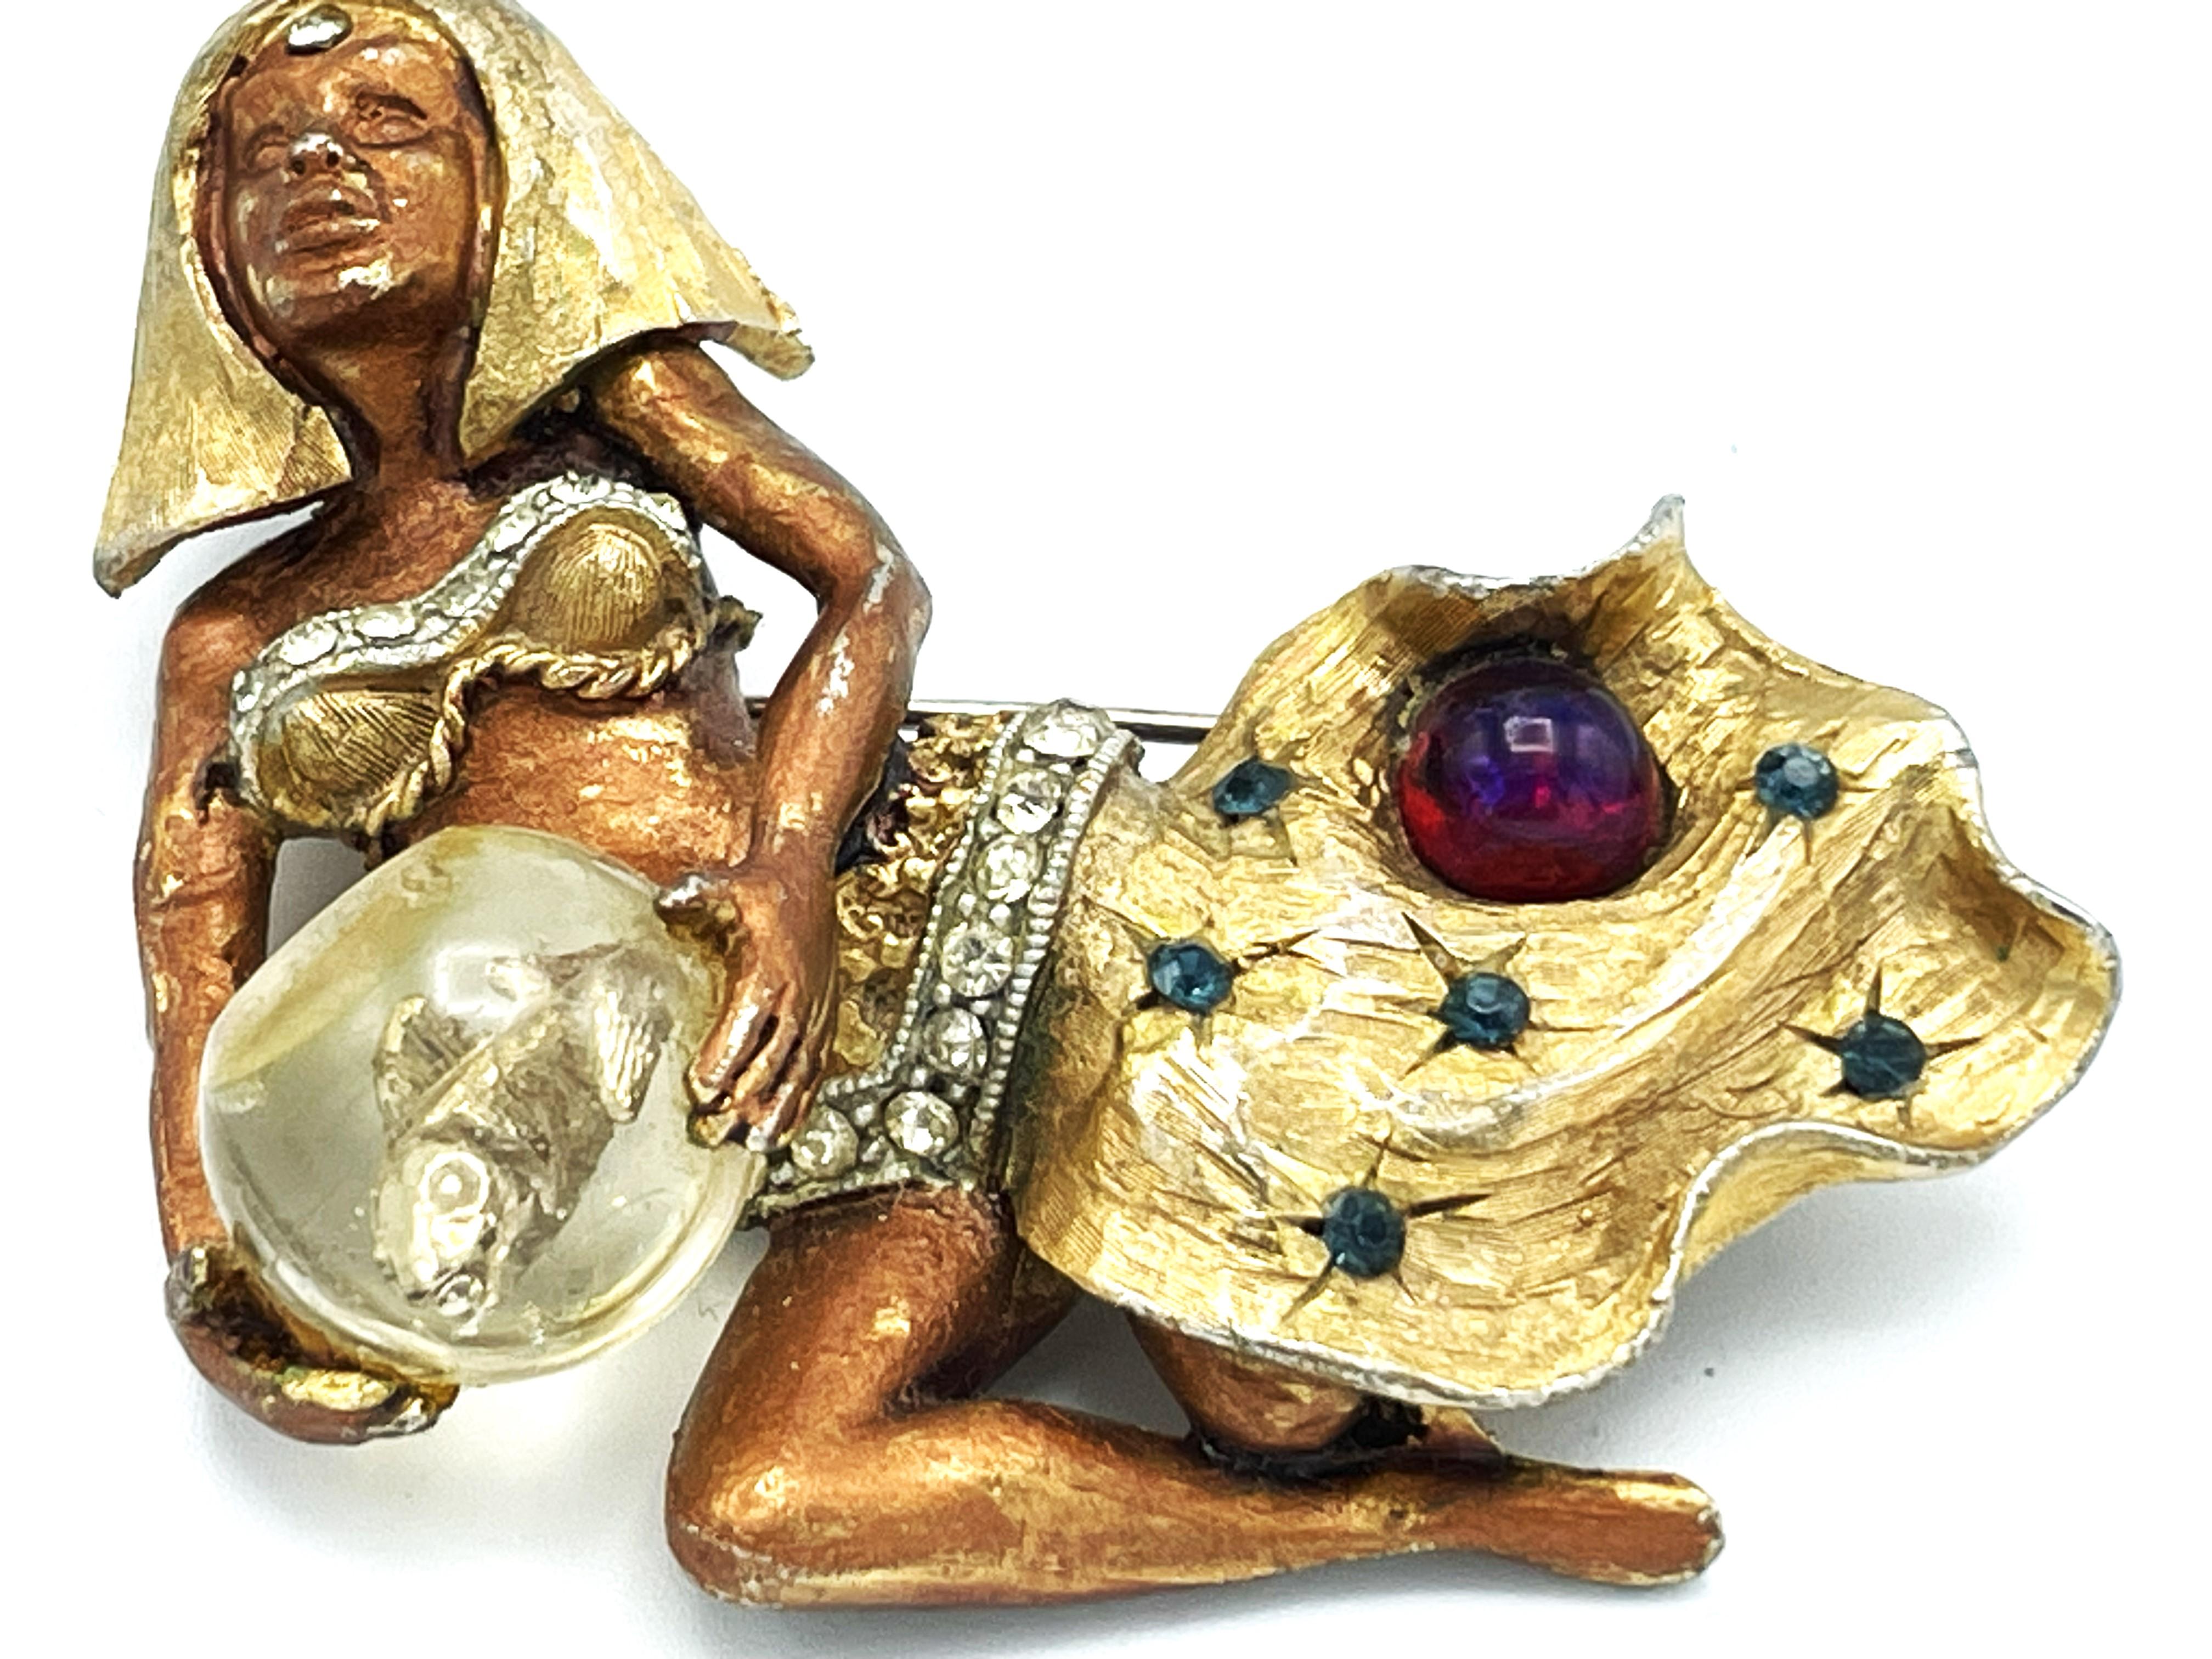 This fantastic HAR brooch is a rare find! The gold toned Cleopatra holds a bowl with a gold-toned metal fish inside. Her top and belt are set with clear rhinestones. The skirt features dark blue rhinestones and a single, dark red ball with a